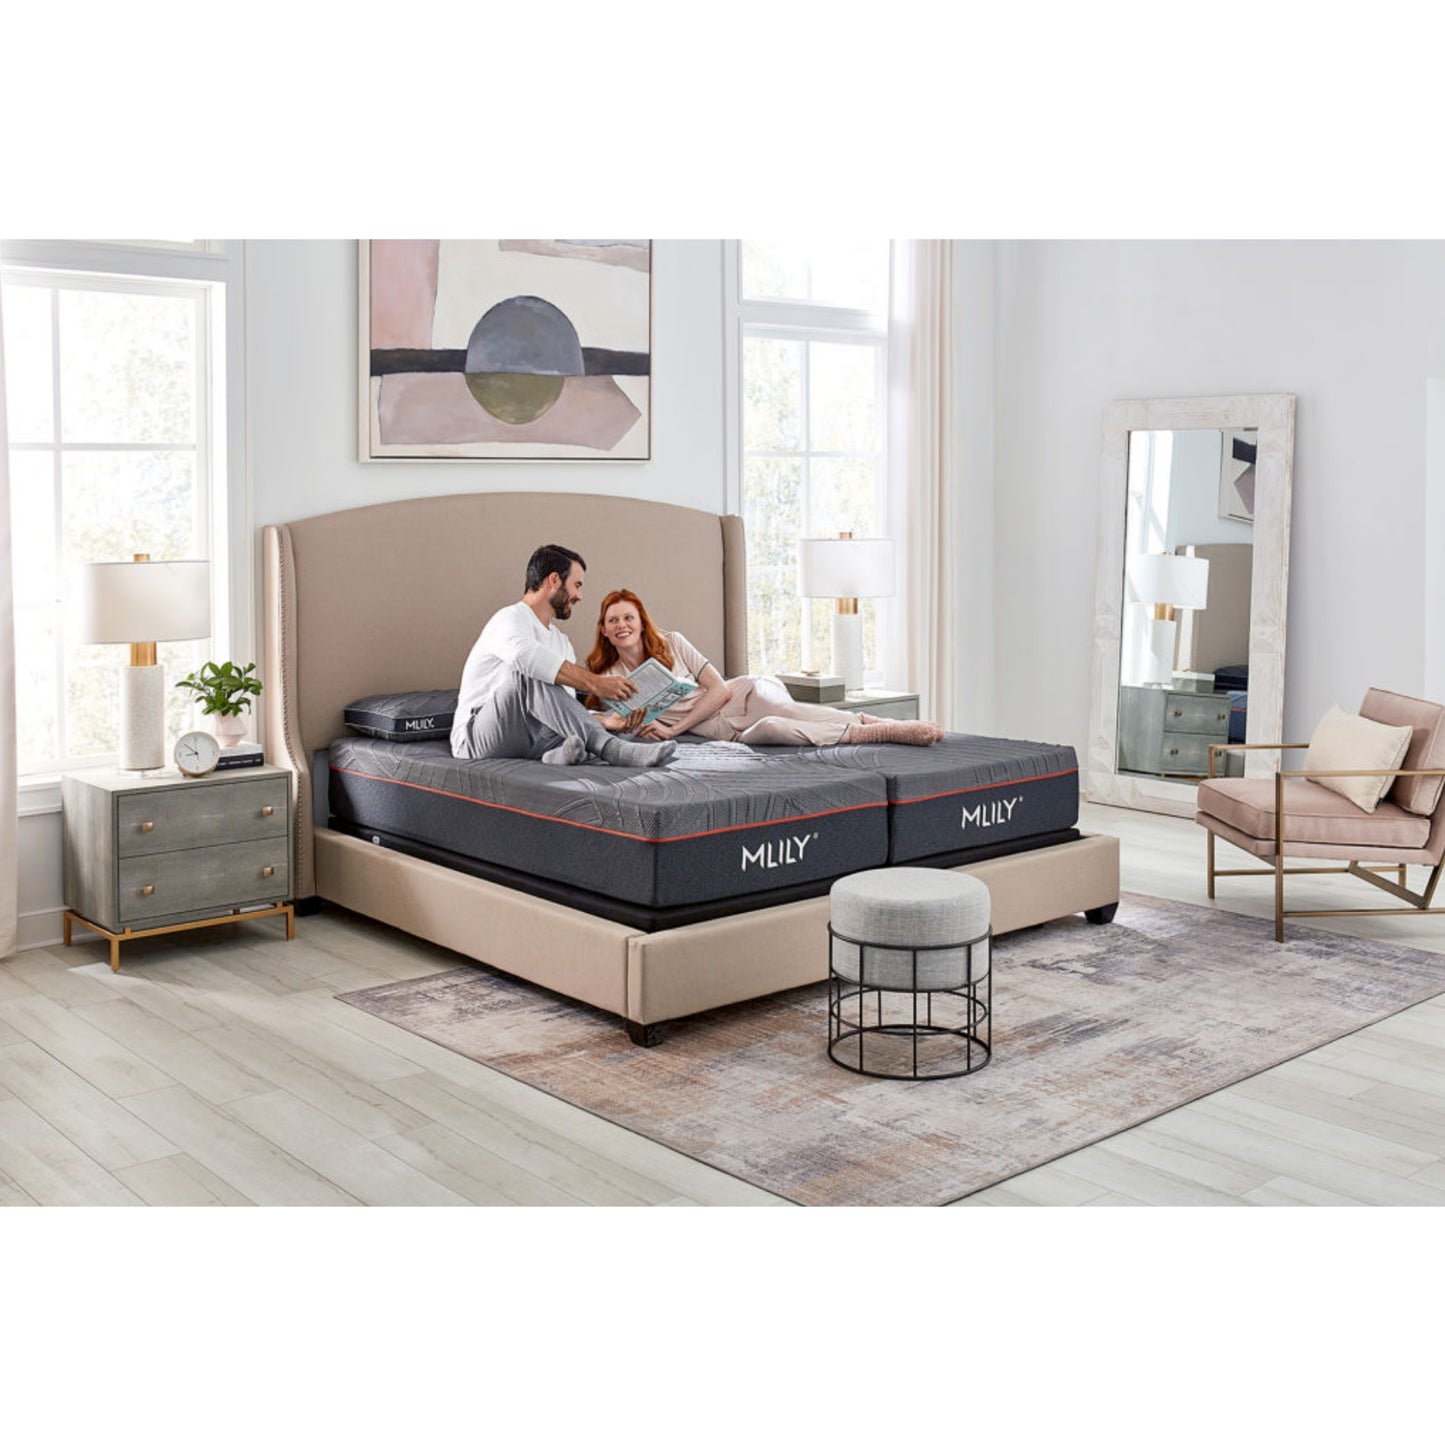 Medium PowerCool 11.5" Hybrid Mattress With Ventilated Memory Foam Pillow(s) And Adjustable Base Featuring Integrated Cooling Fans Inside Of A Bedroom With Man And Woman Enjoying Each Other's Company, Corner View